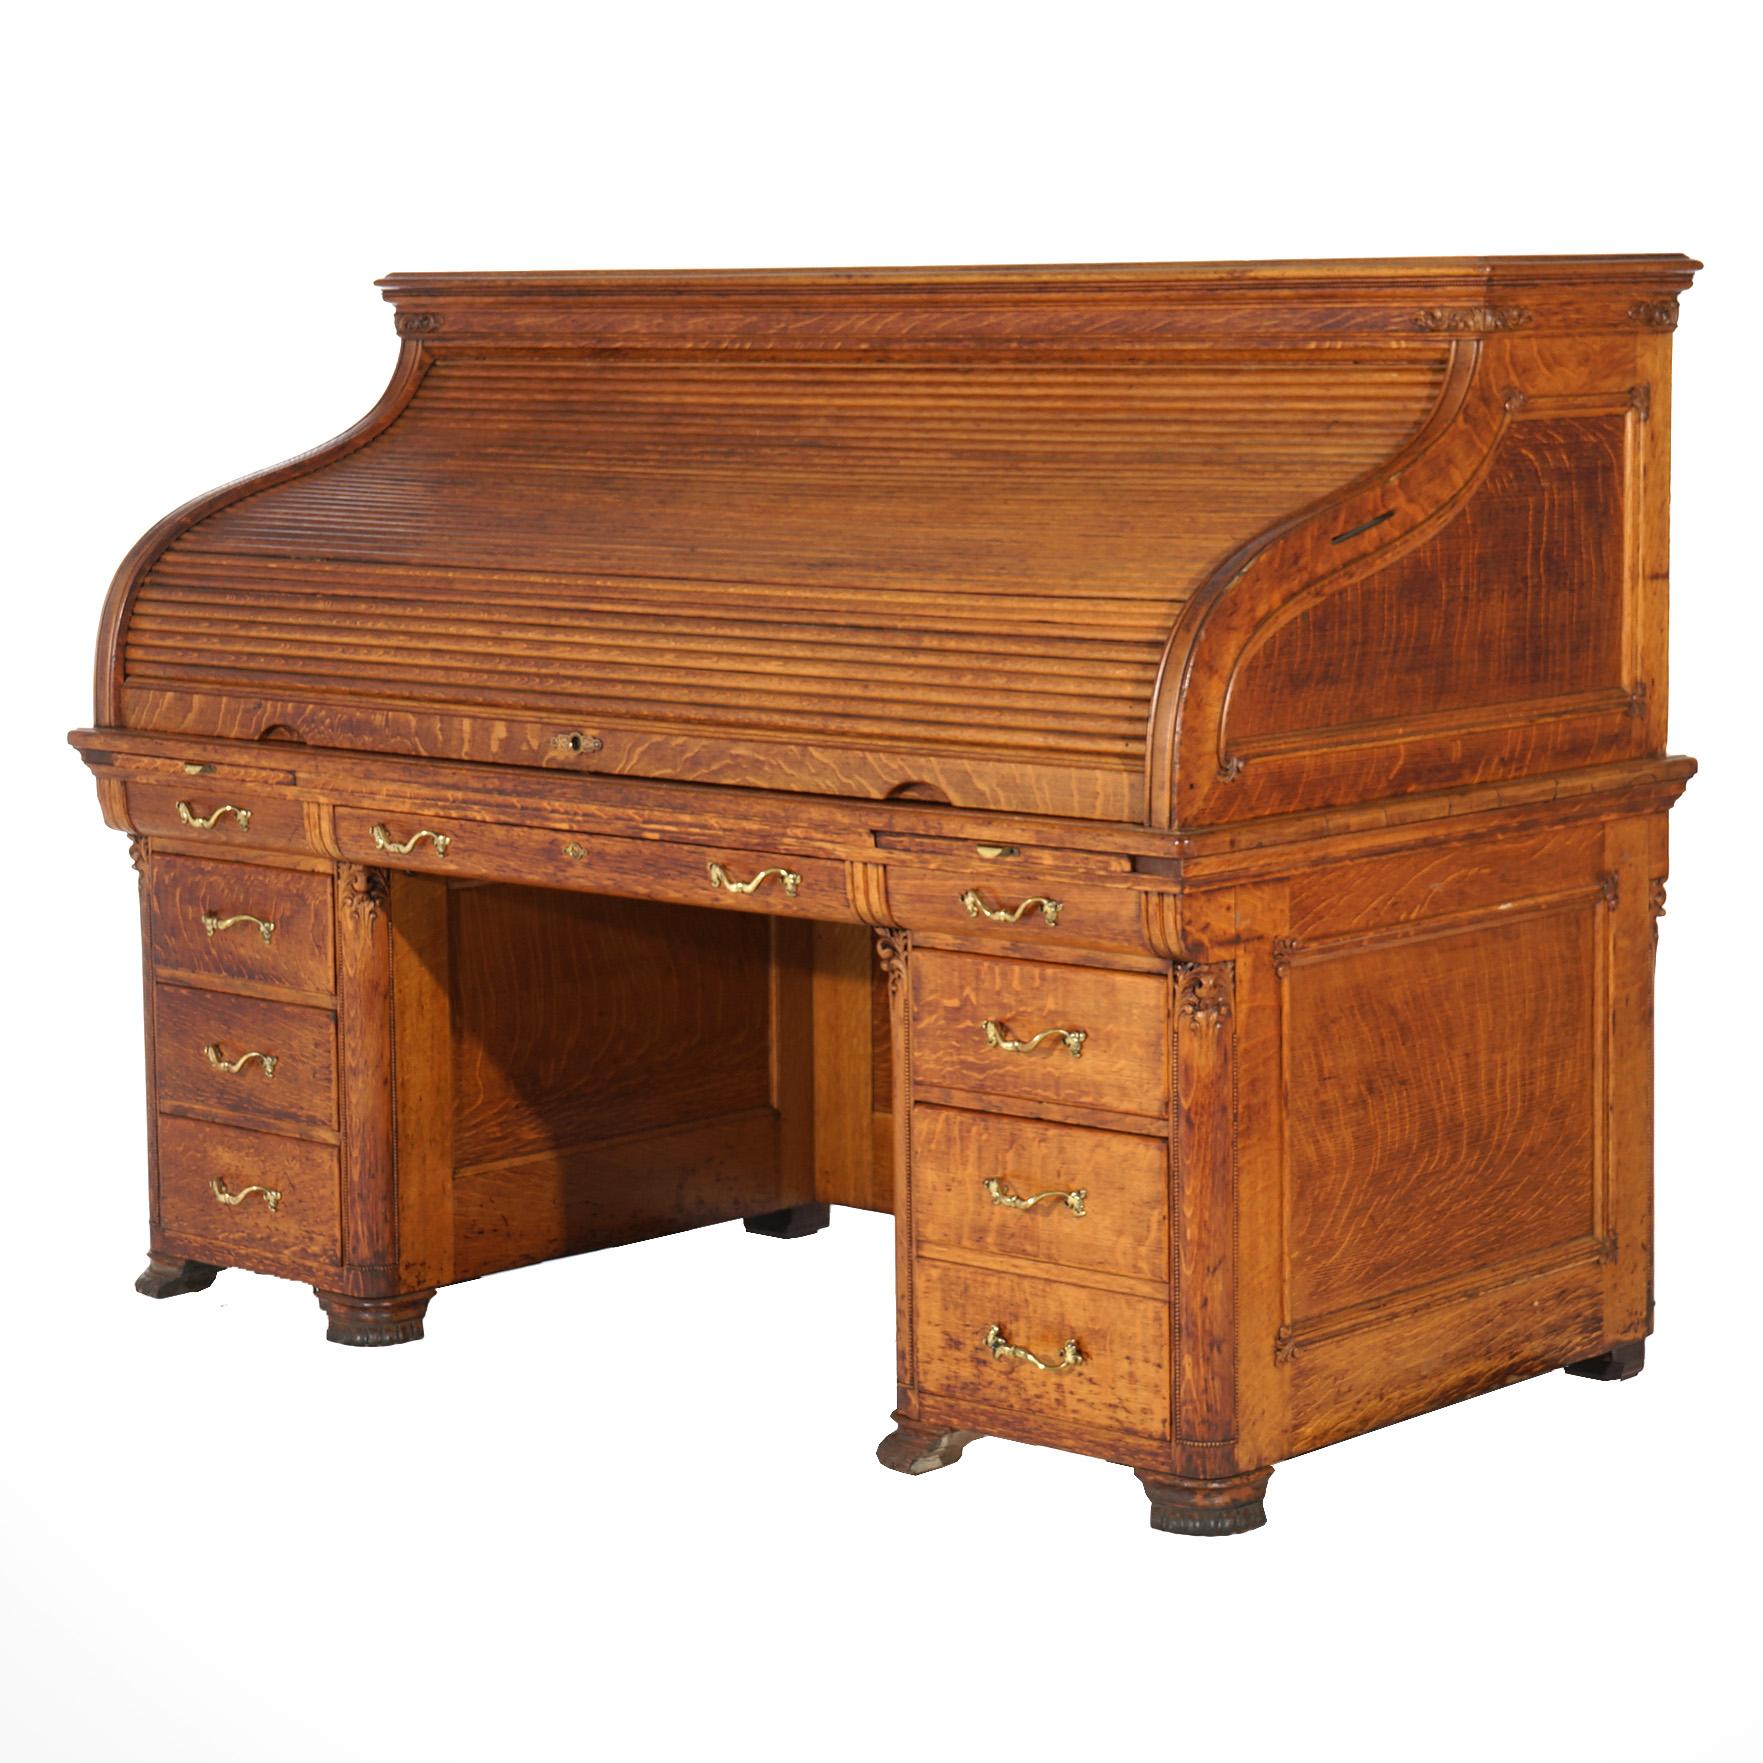 An antique Horner School s-roll top desk in the manner of Horner offers quarter sawn oak construction with s-roll opening to full interior over paneled case, c1900

Measures - 50.5